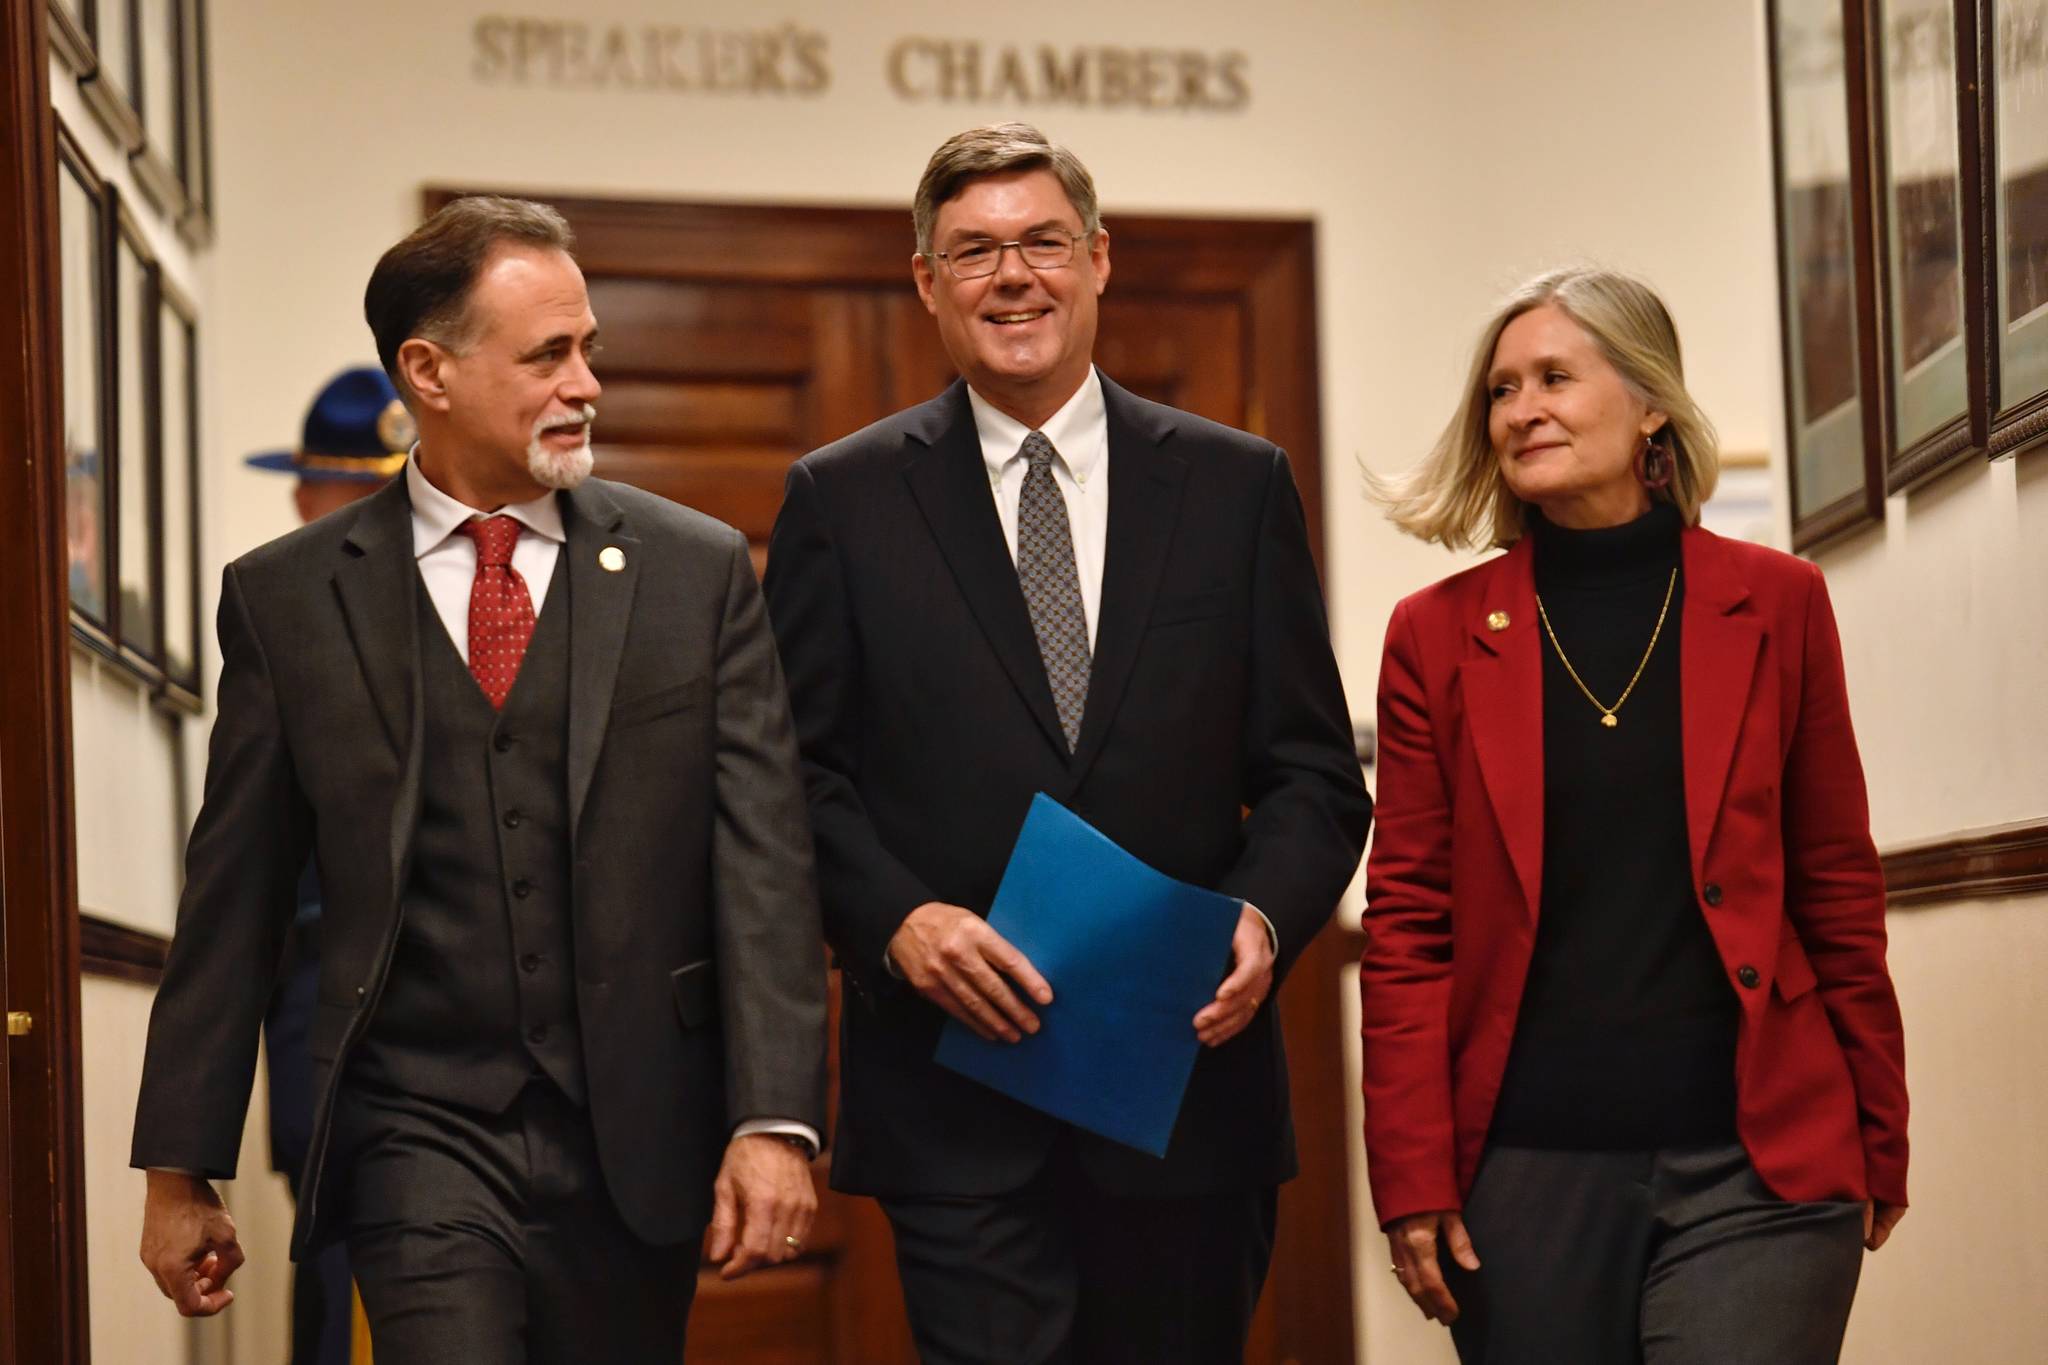 Alaska Supreme Court Chief Justice Joel H. Bolger, center, is escorted to the House of Representatives by Sen. Peter Micciche, R- Soldotna, left, and Rep. Andi Story, D-Juneau, for the annual State of the Judiciary speech at the Capitol on Wednesday, Feb. 20, 2019. (Michael Penn | Juneau Empire)